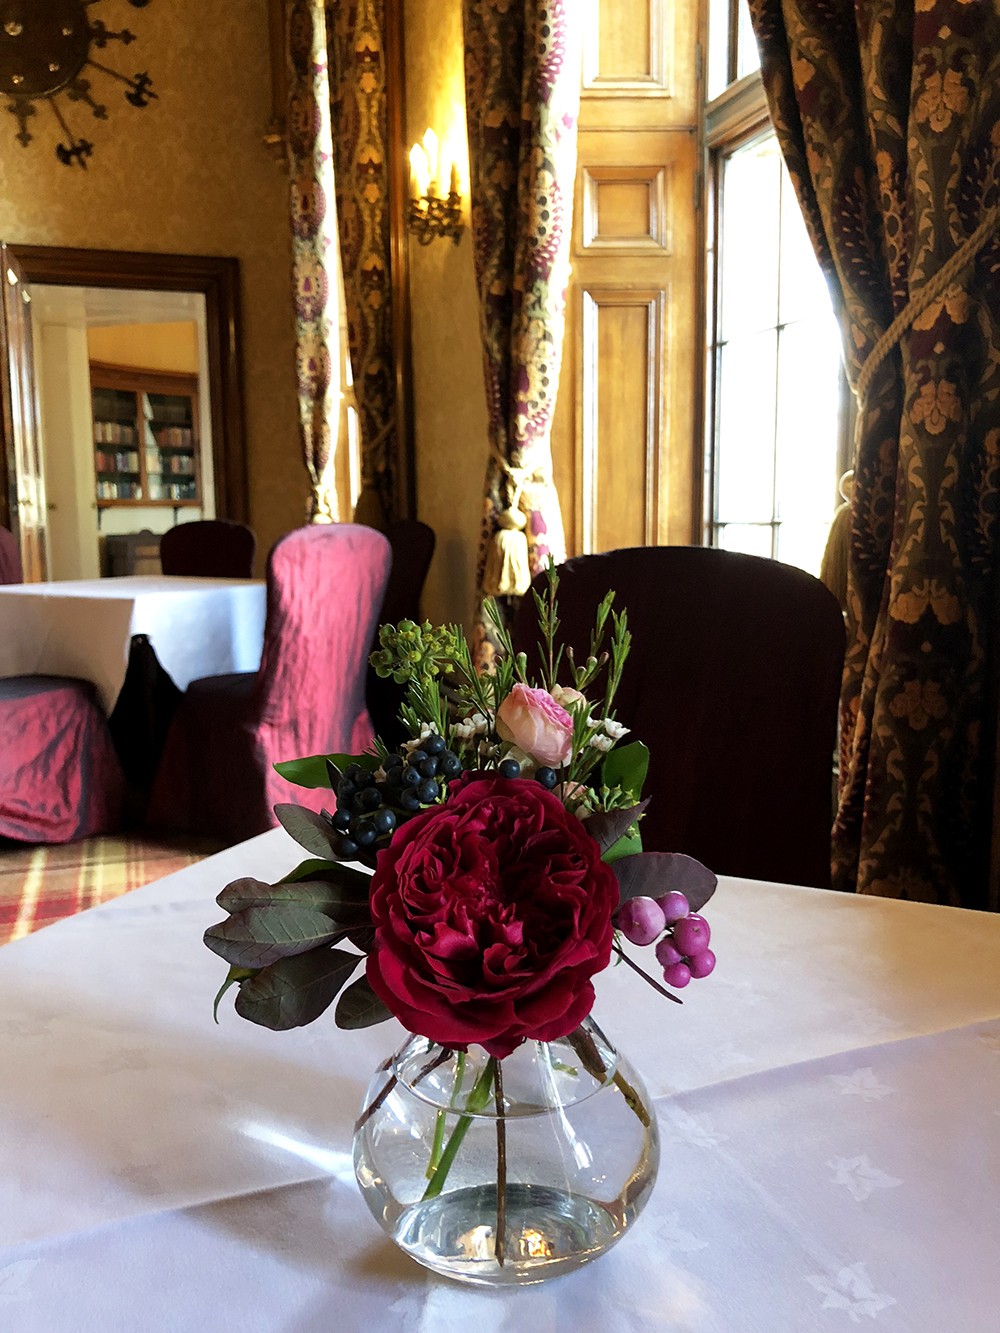 Narcissus Flowers - Wild and Beautiful - Burgundy Red Pink and Green Wedding Decor at My Beauty Bunny's Scotland Wedding